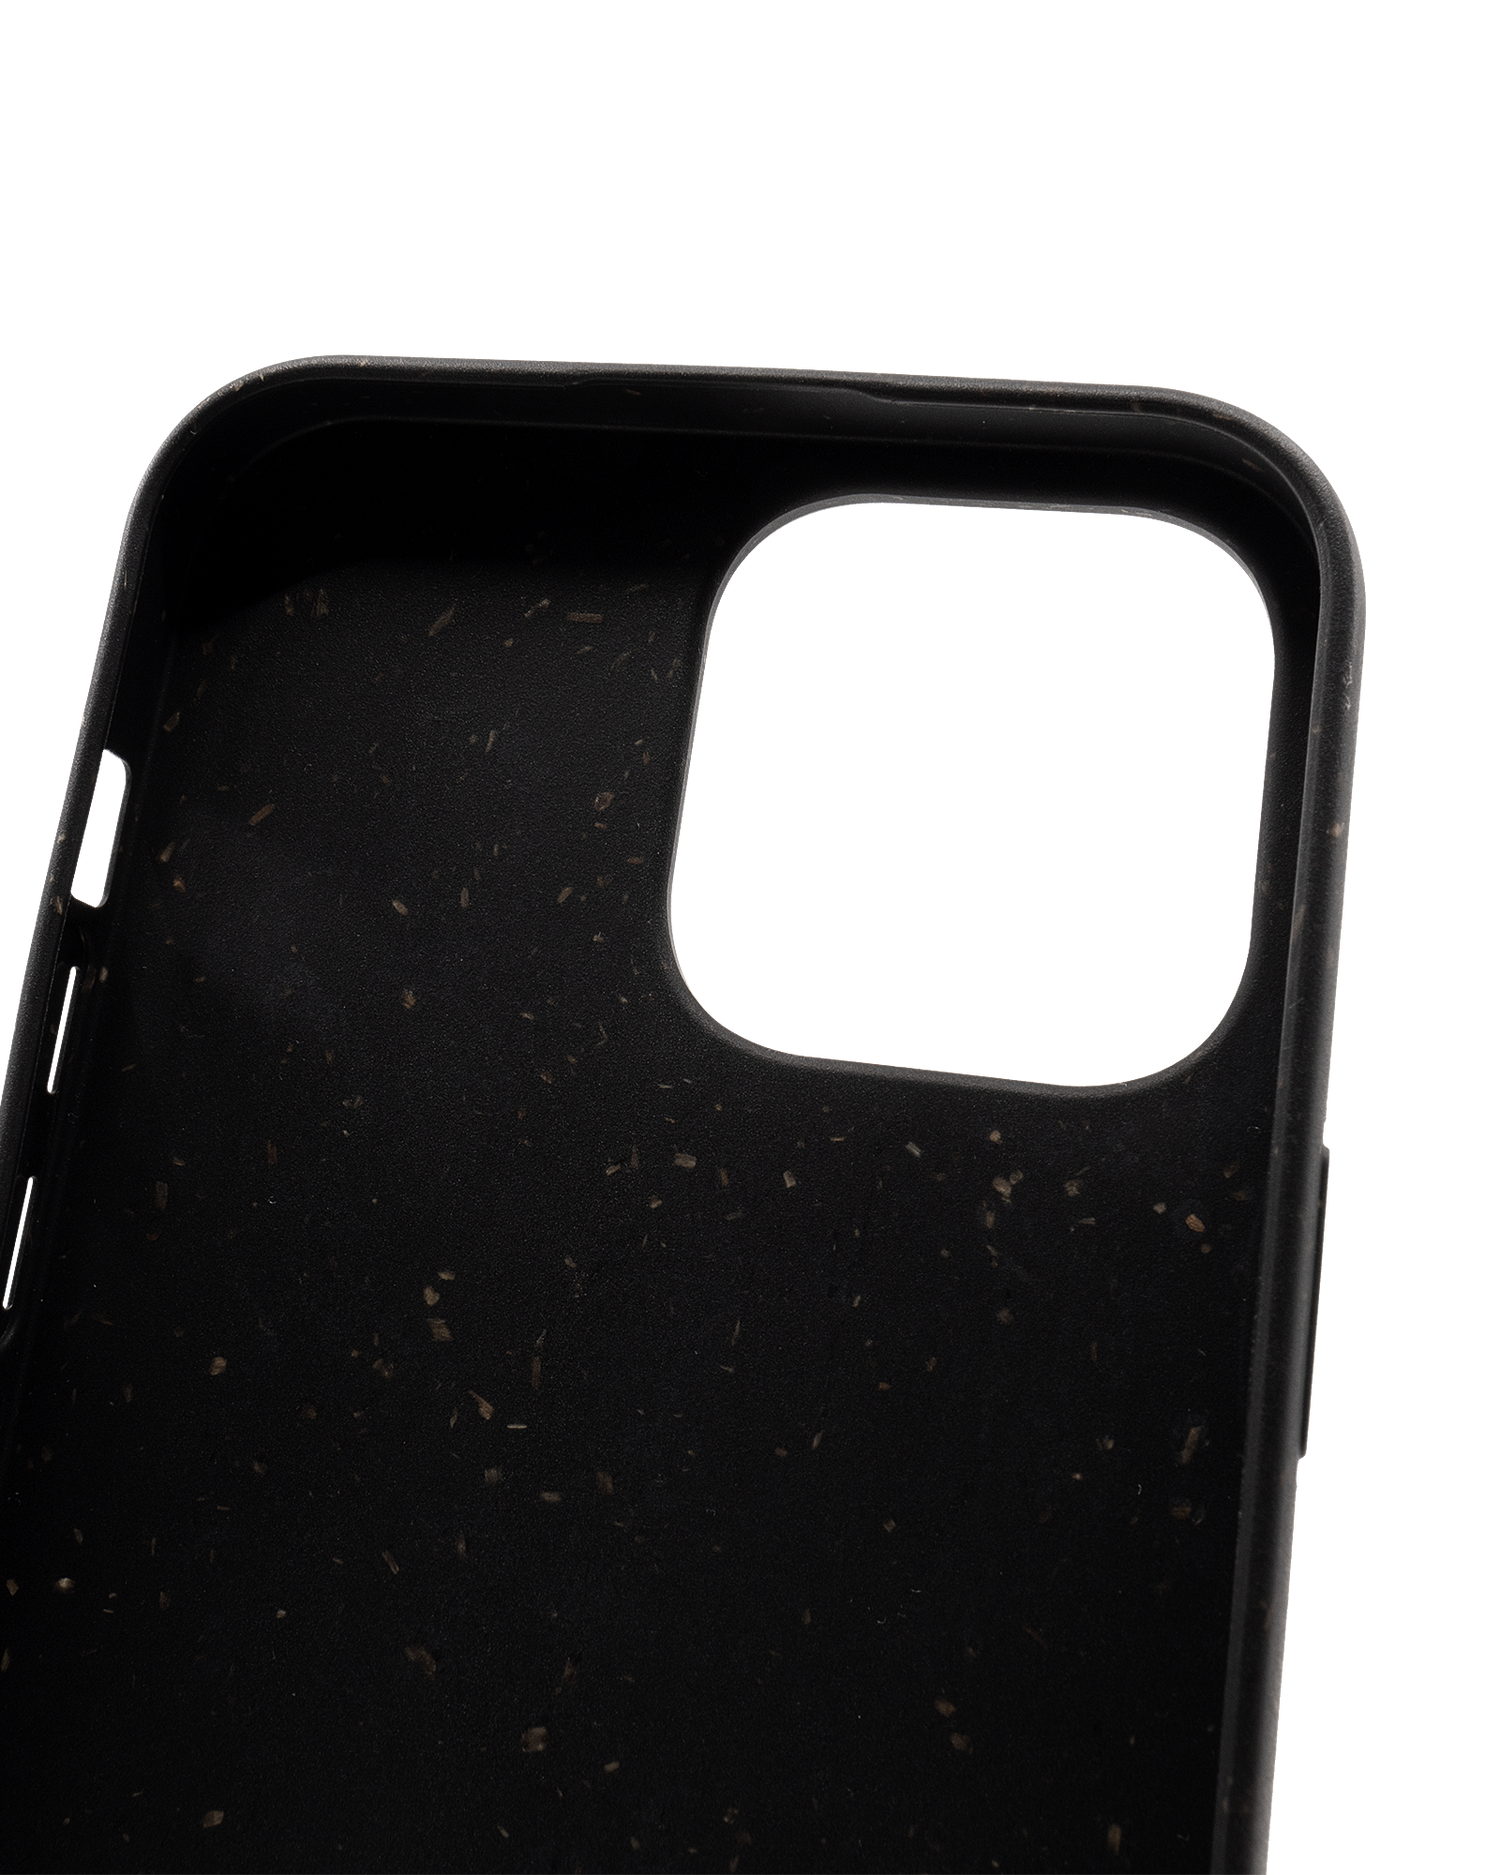 Black Eco-Friendly Phone Case for Apple iPhone 13 Pro Max: Details outside